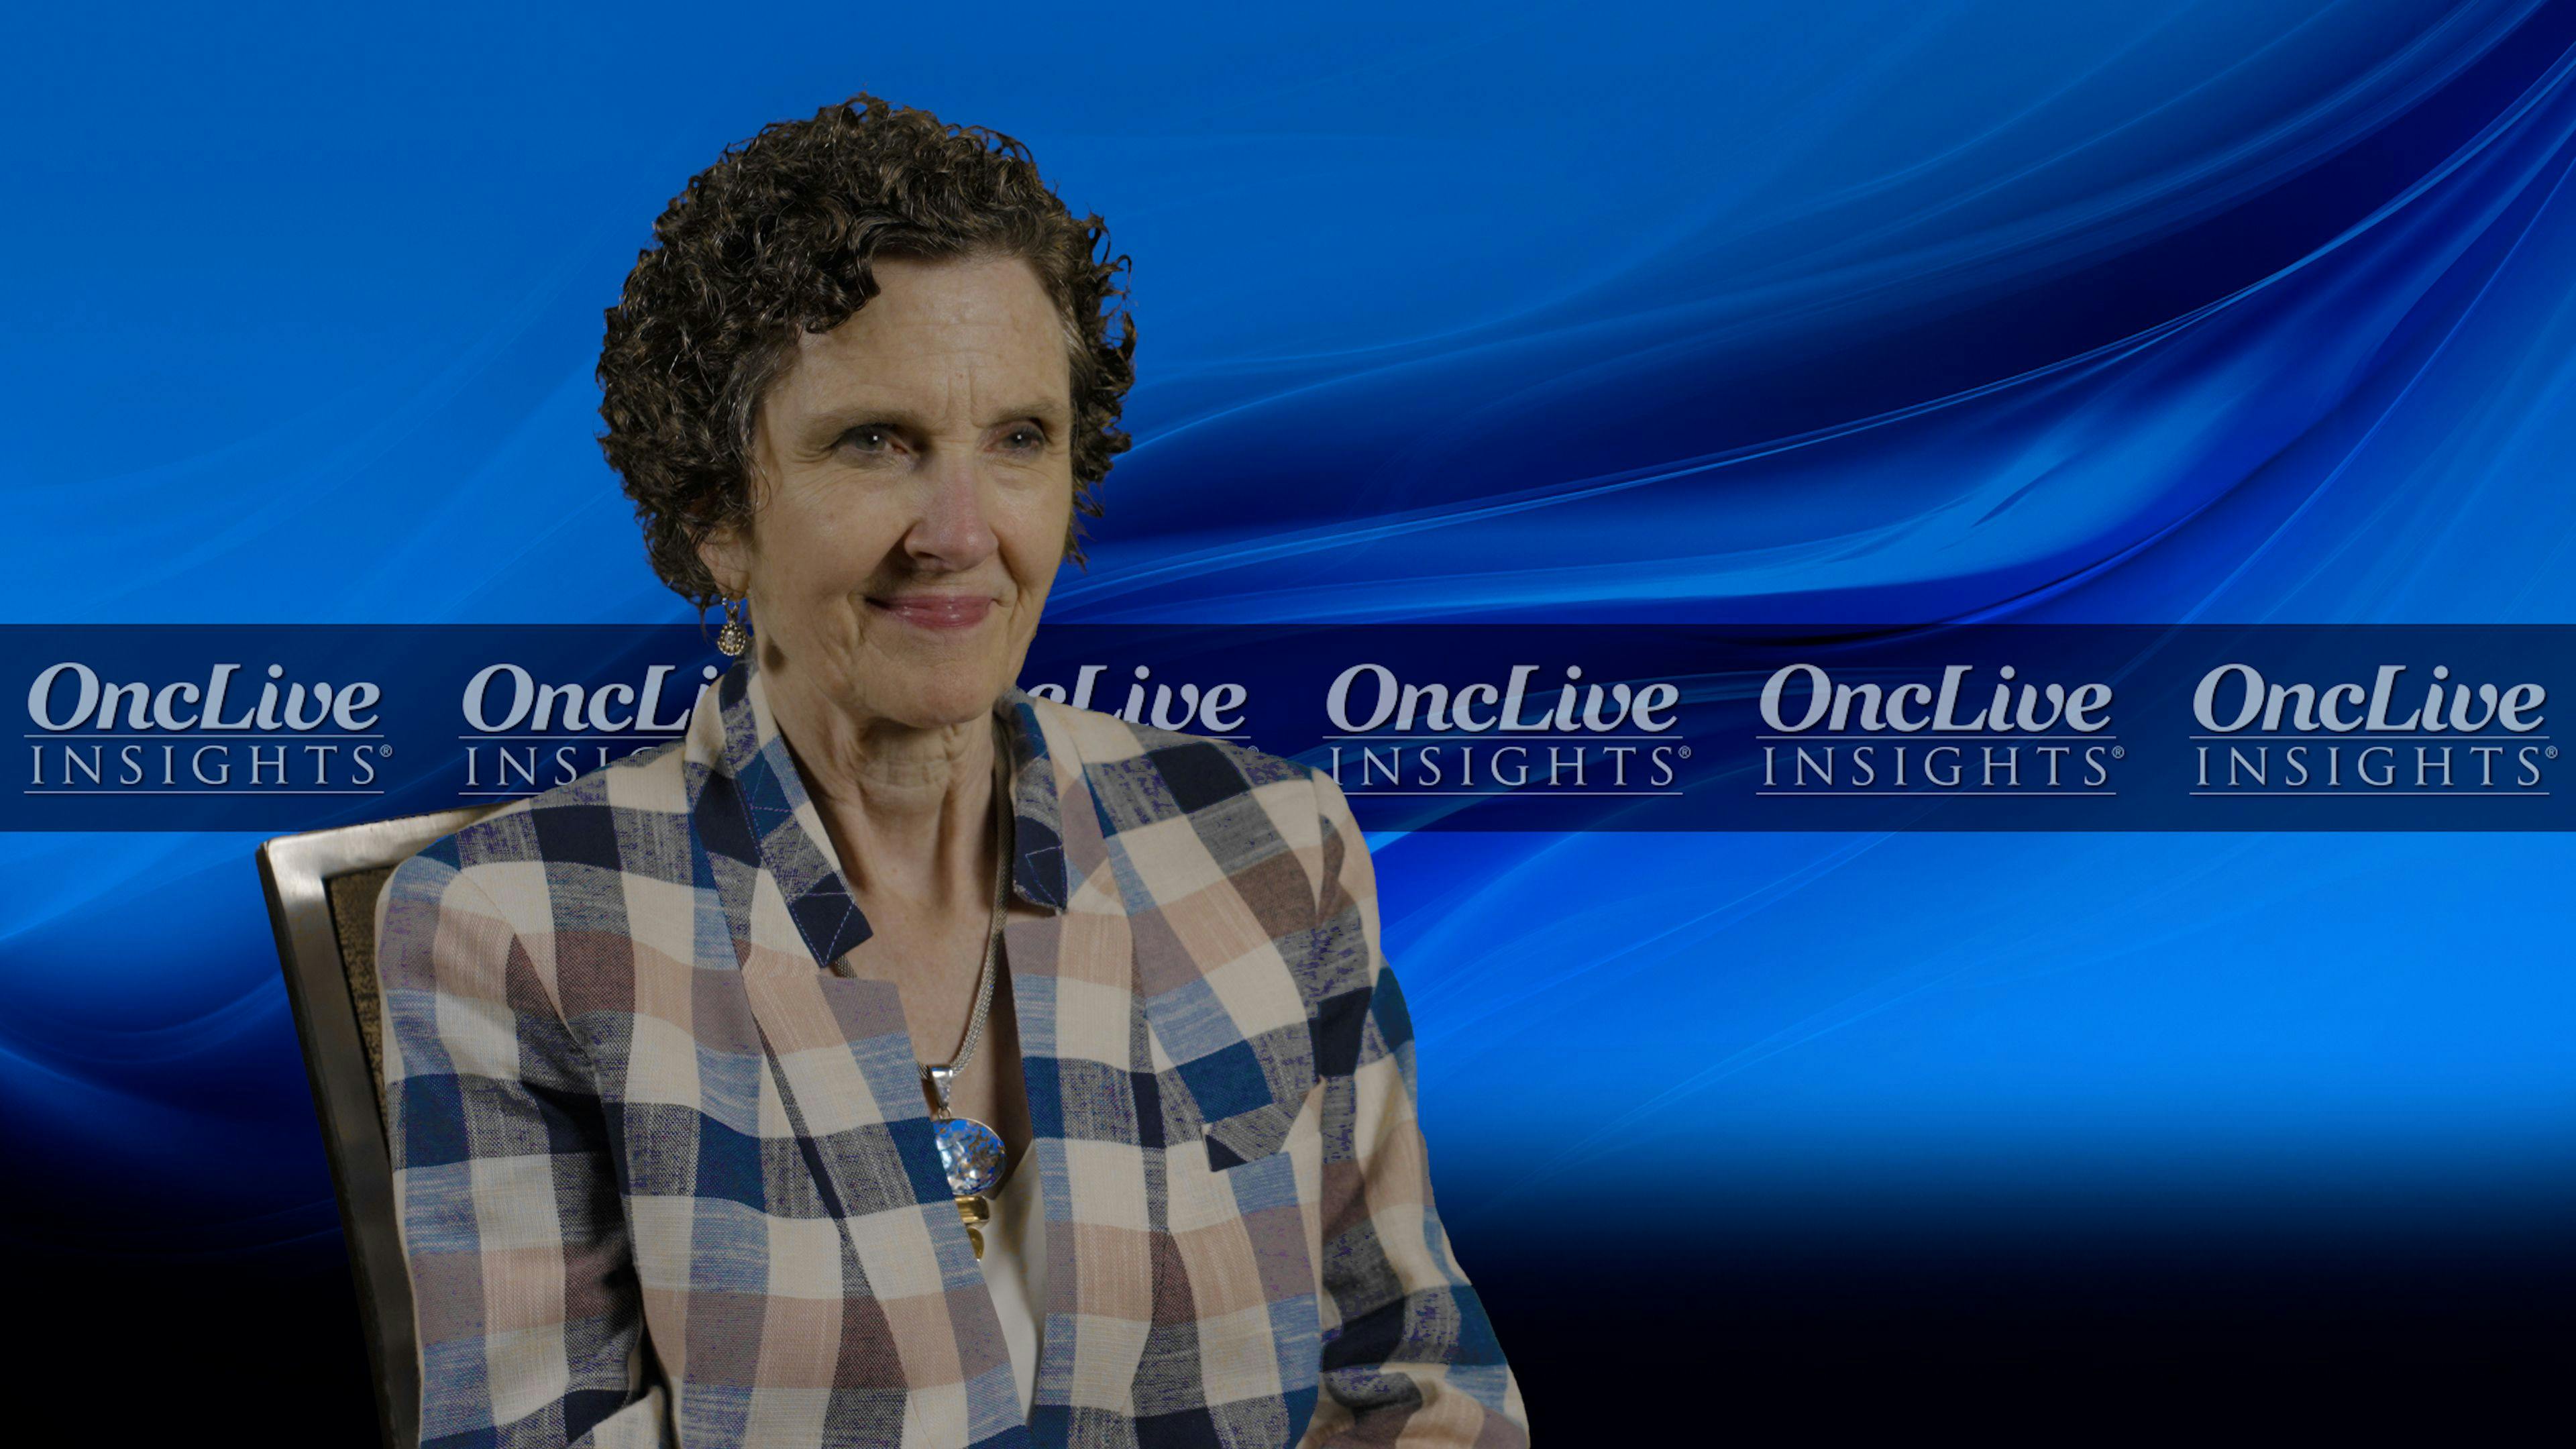 Multidisciplinary Care for a Patient With Metastatic HER2+ Breast Cancer